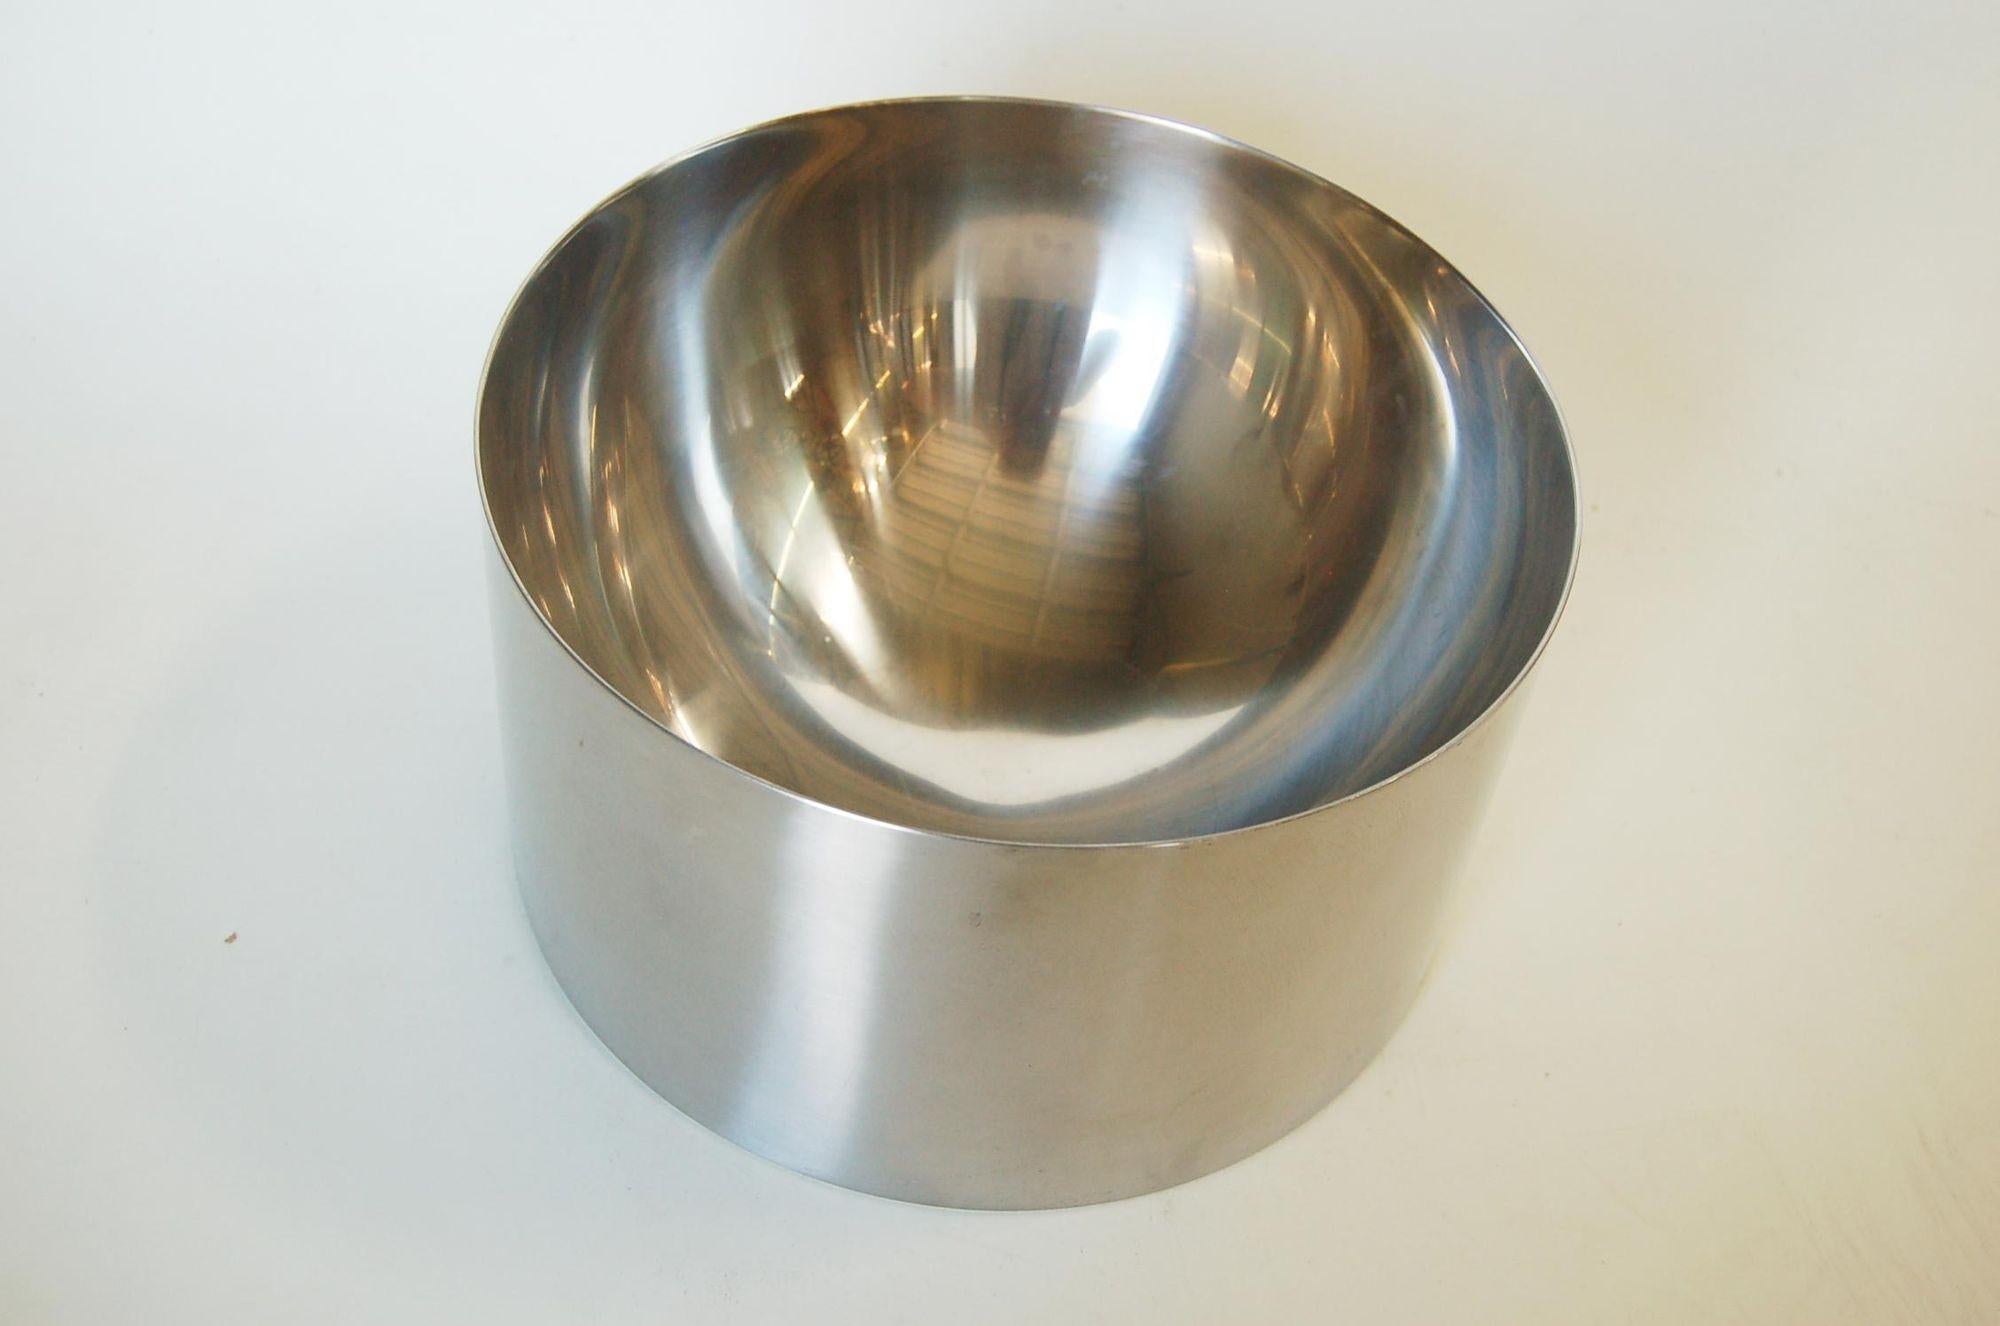 Mid-Century Modern Cylinda-Line Stainless Steel Salad Bowl by Arne Jacobsen for Stelton, Circa 1967 Made In Denmark.

Measures 5.5